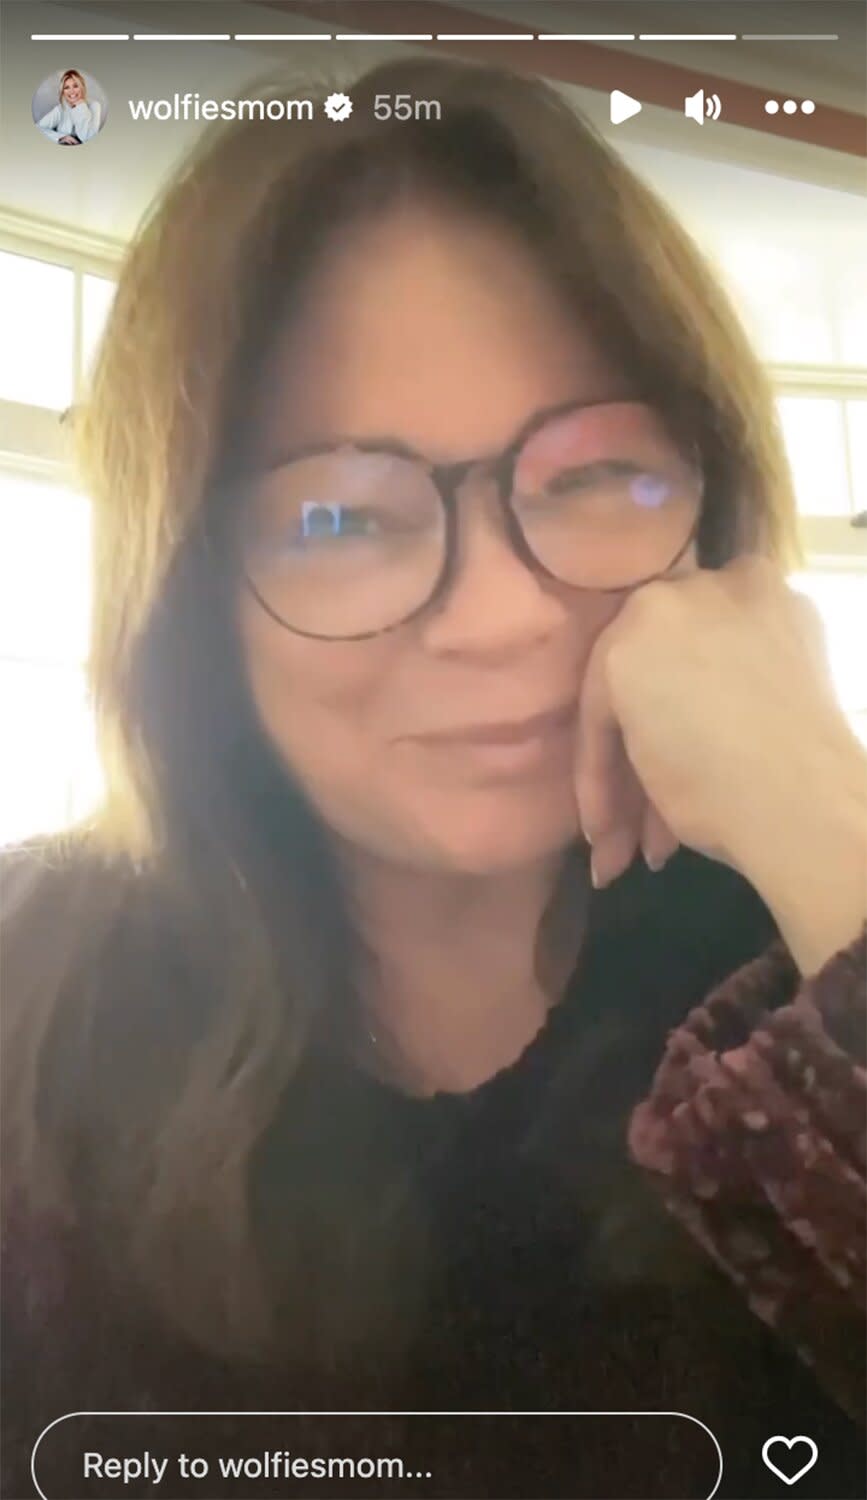 Valerie Bertinelli is doing dry january to 'reset' after being in 'flight, fight' during her divorce